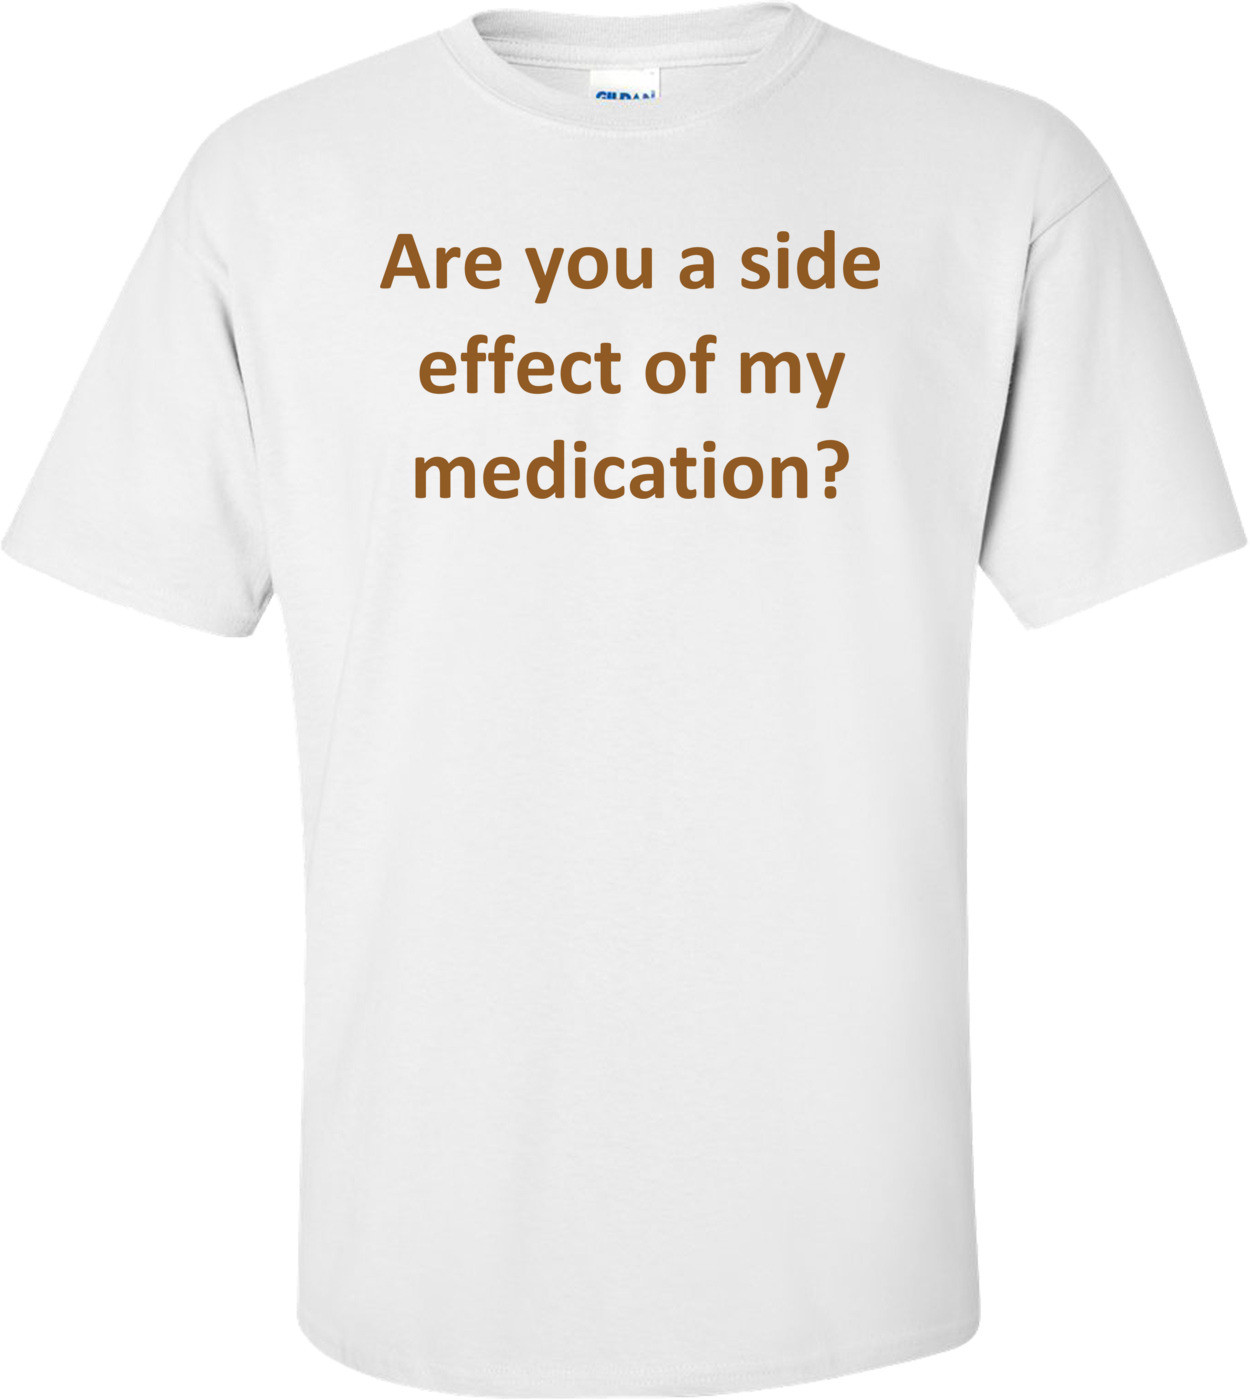 Are you a side effect of my medication?